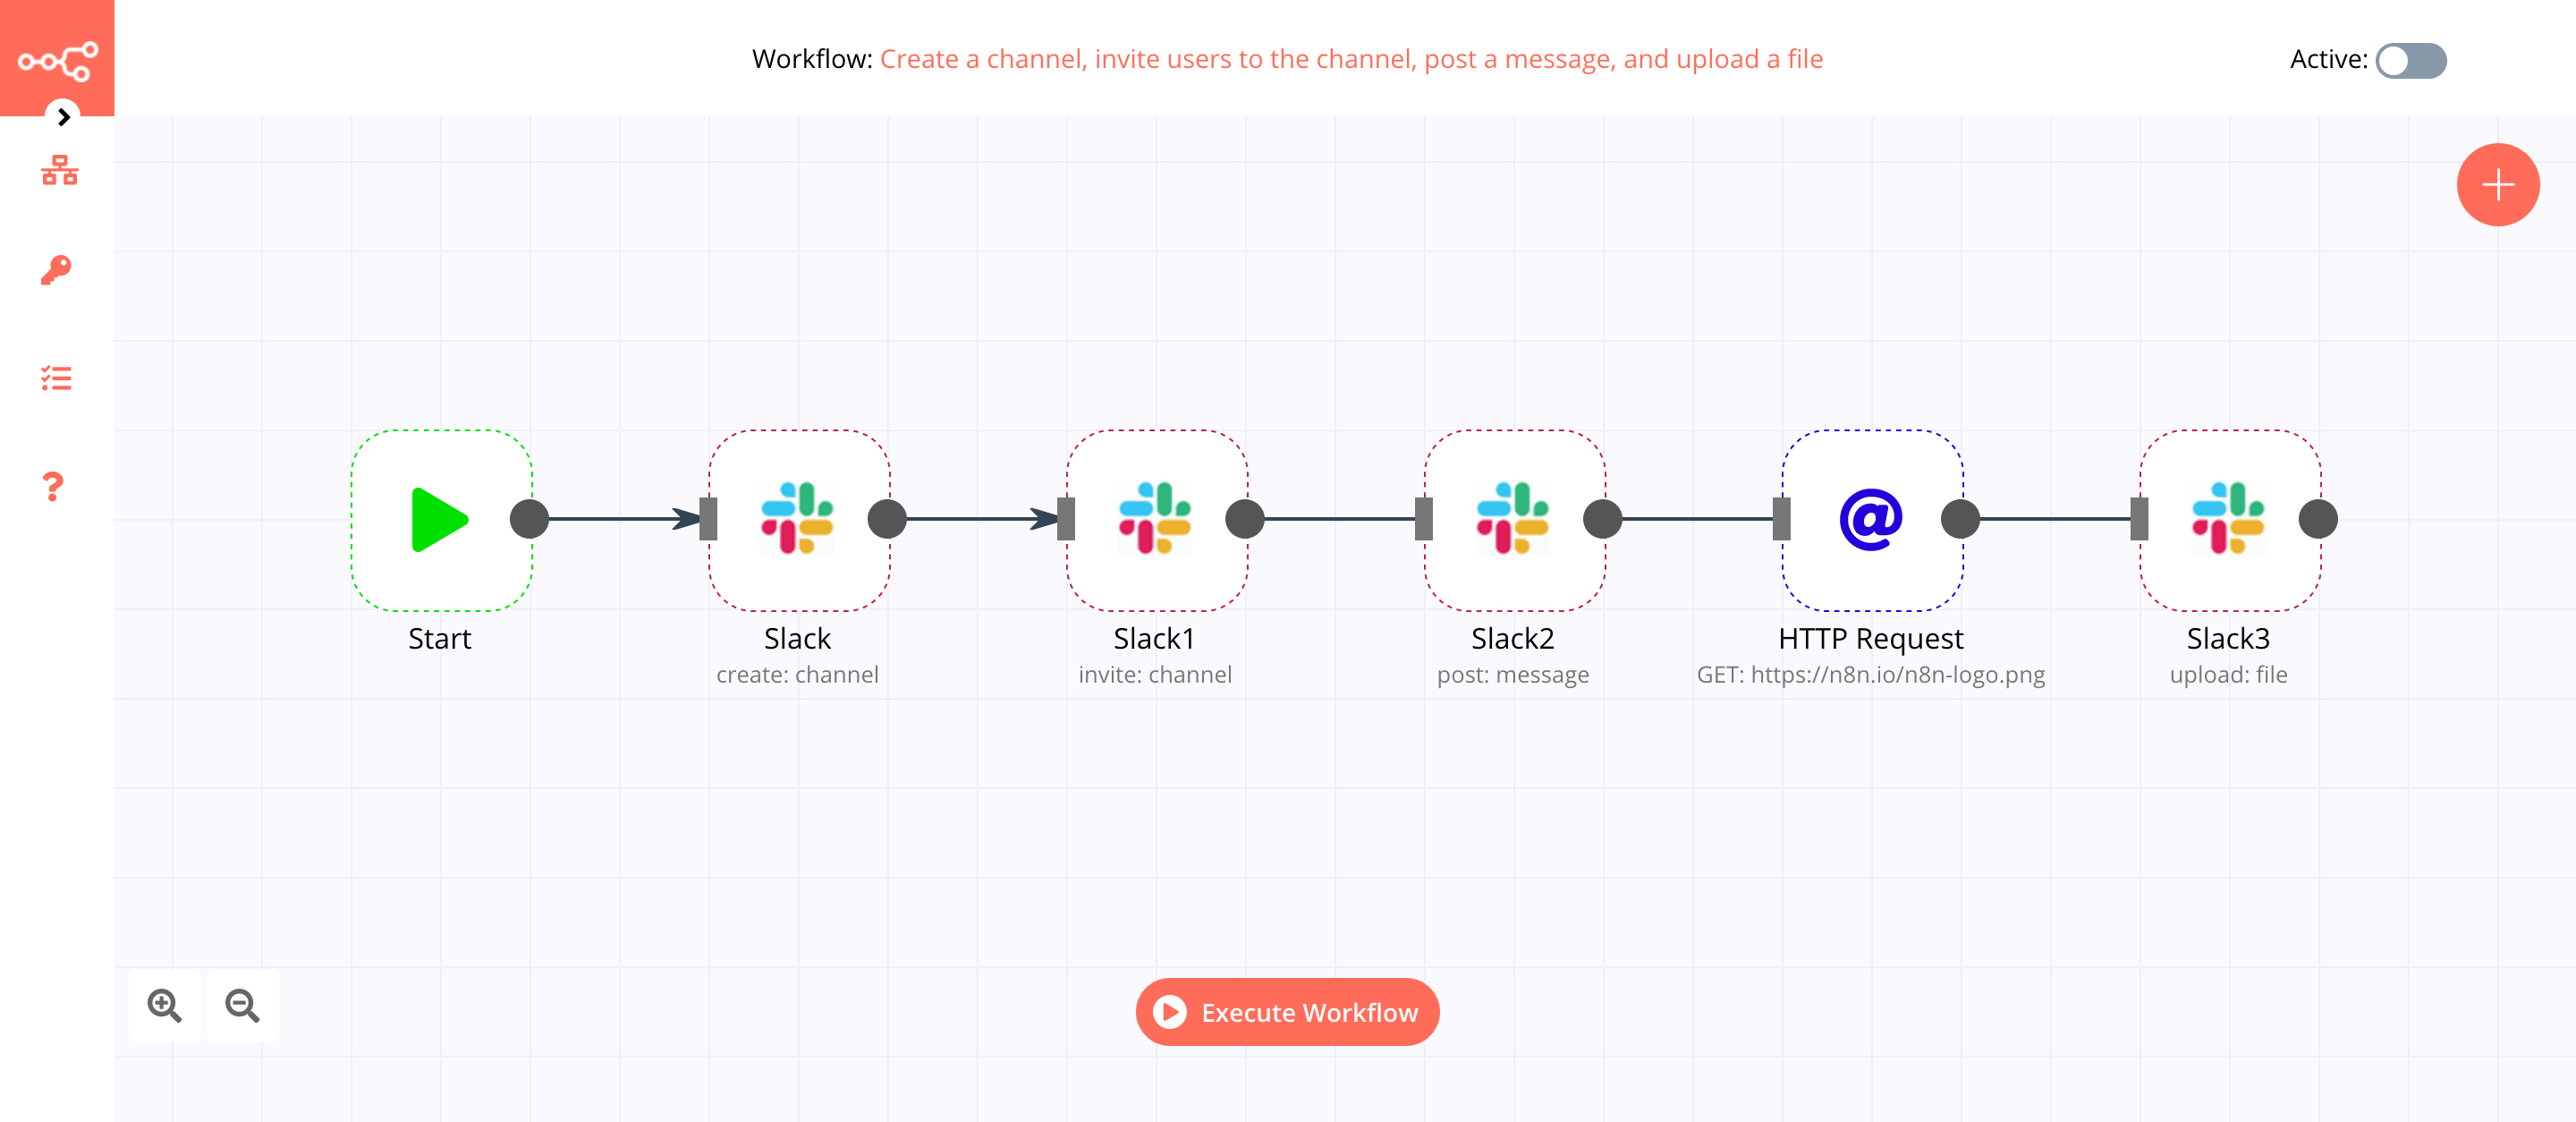 A workflow with the Slack node